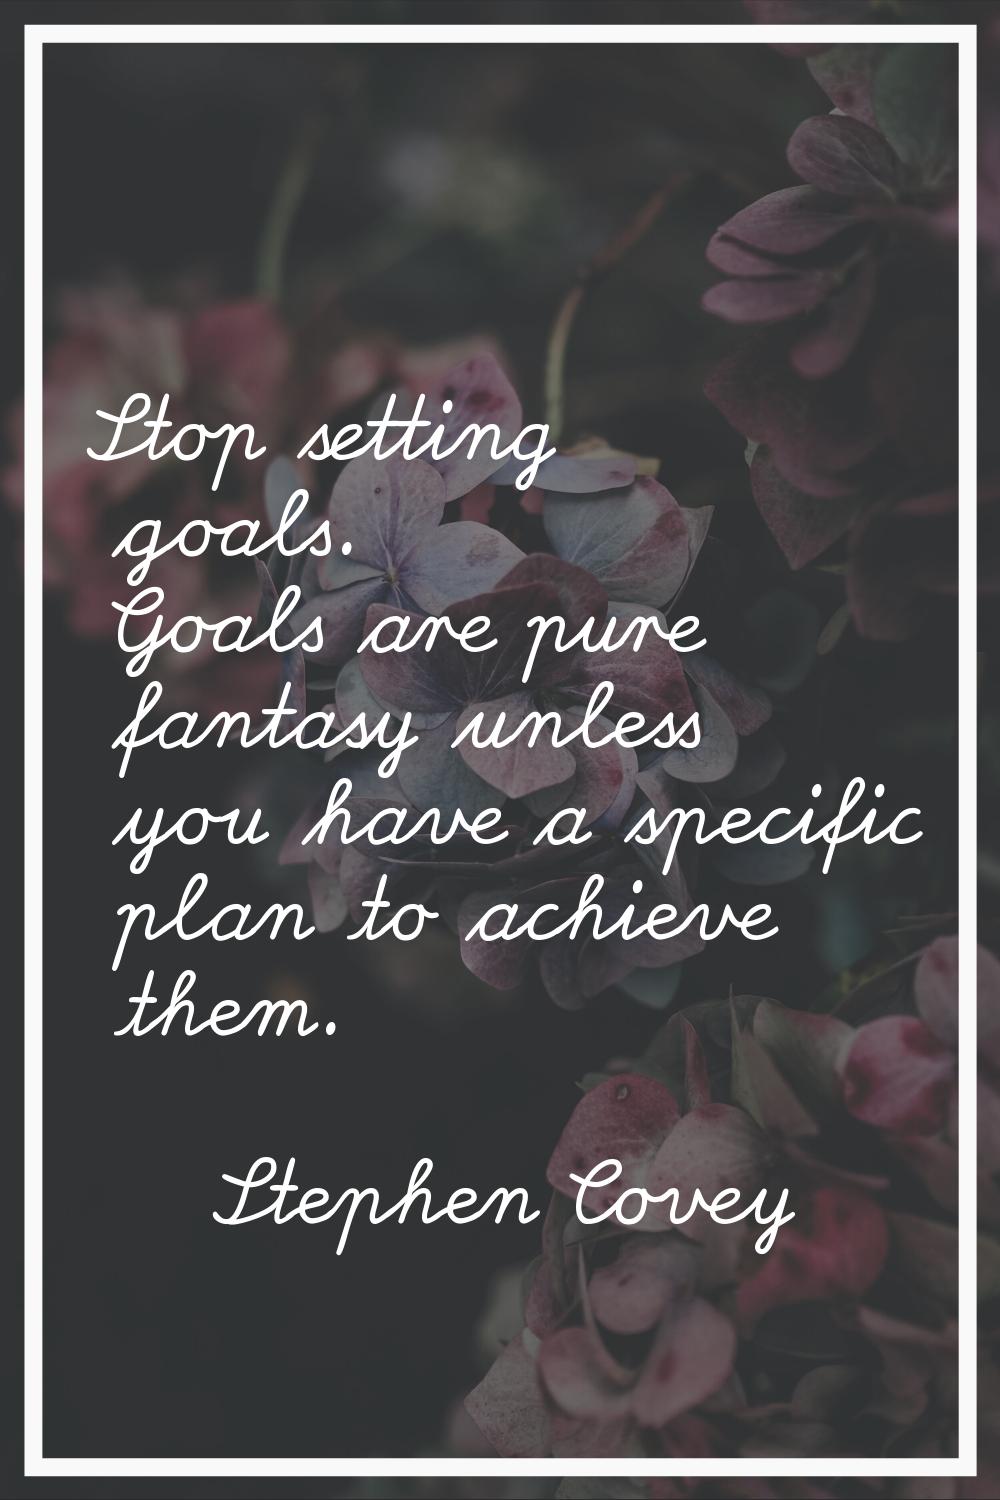 Stop setting goals. Goals are pure fantasy unless you have a specific plan to achieve them.